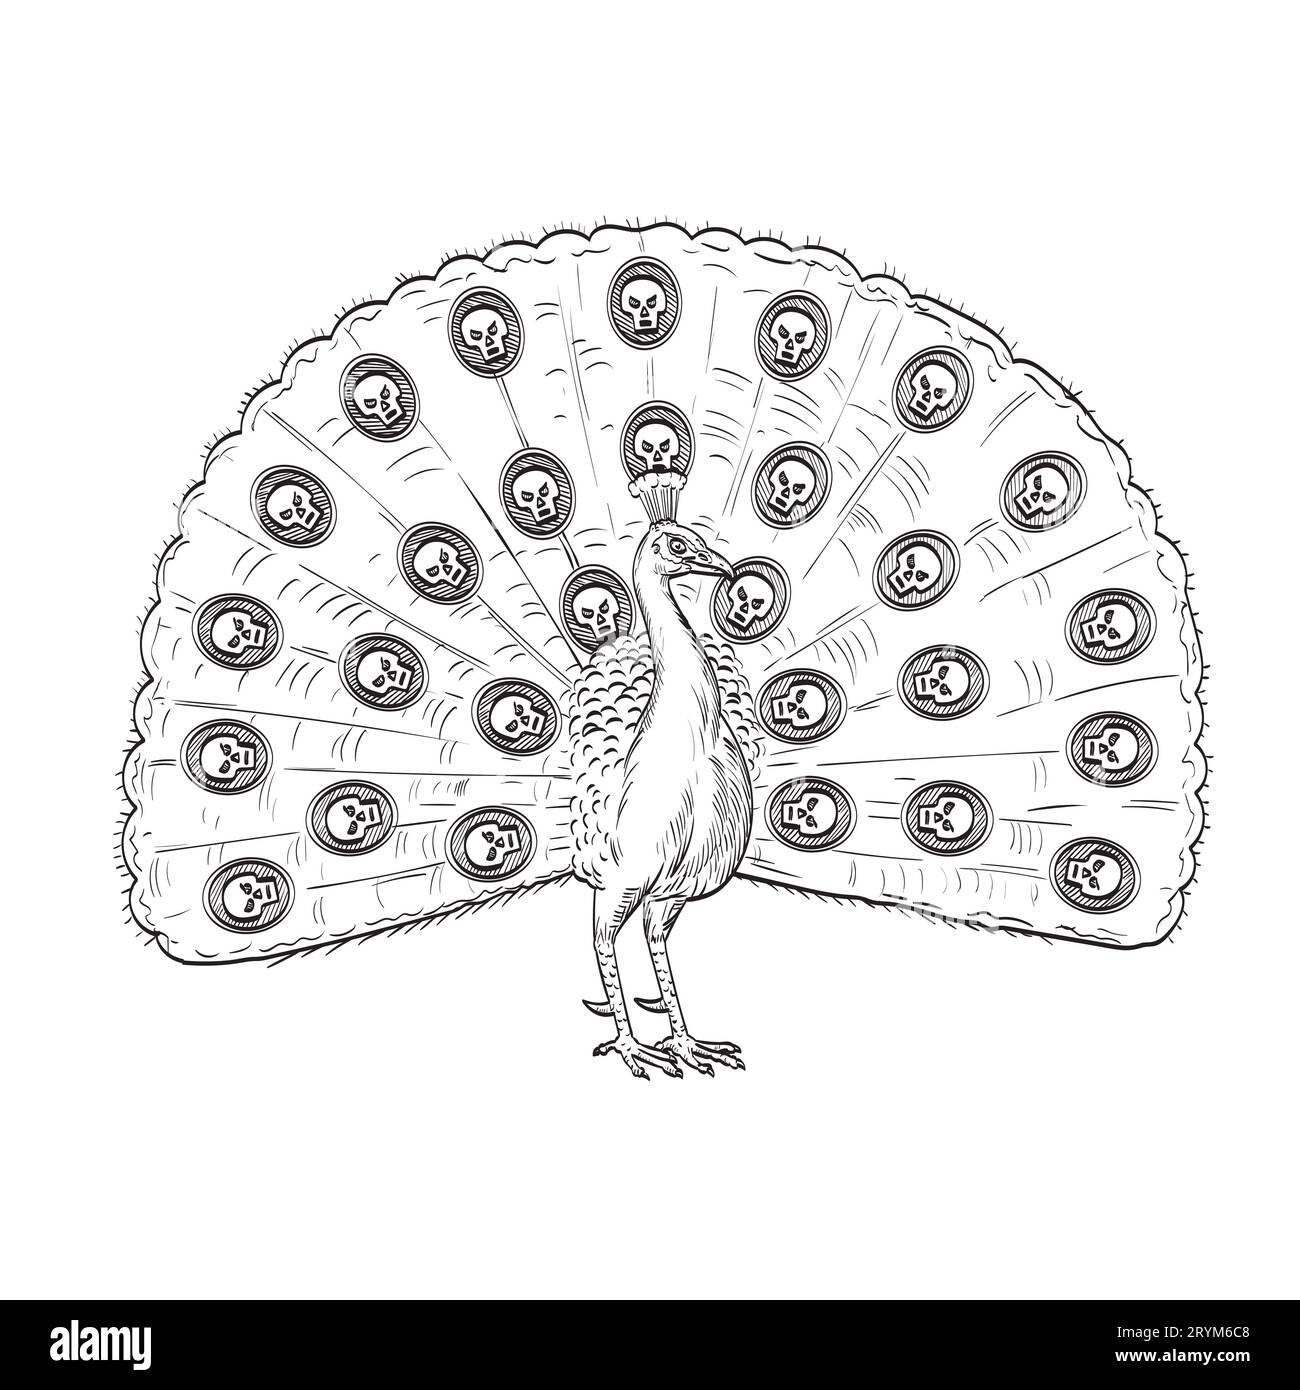 Peacock or Indian Peafowl with Fan Like Tail of Skull Comics Style Drawing Stock Photo